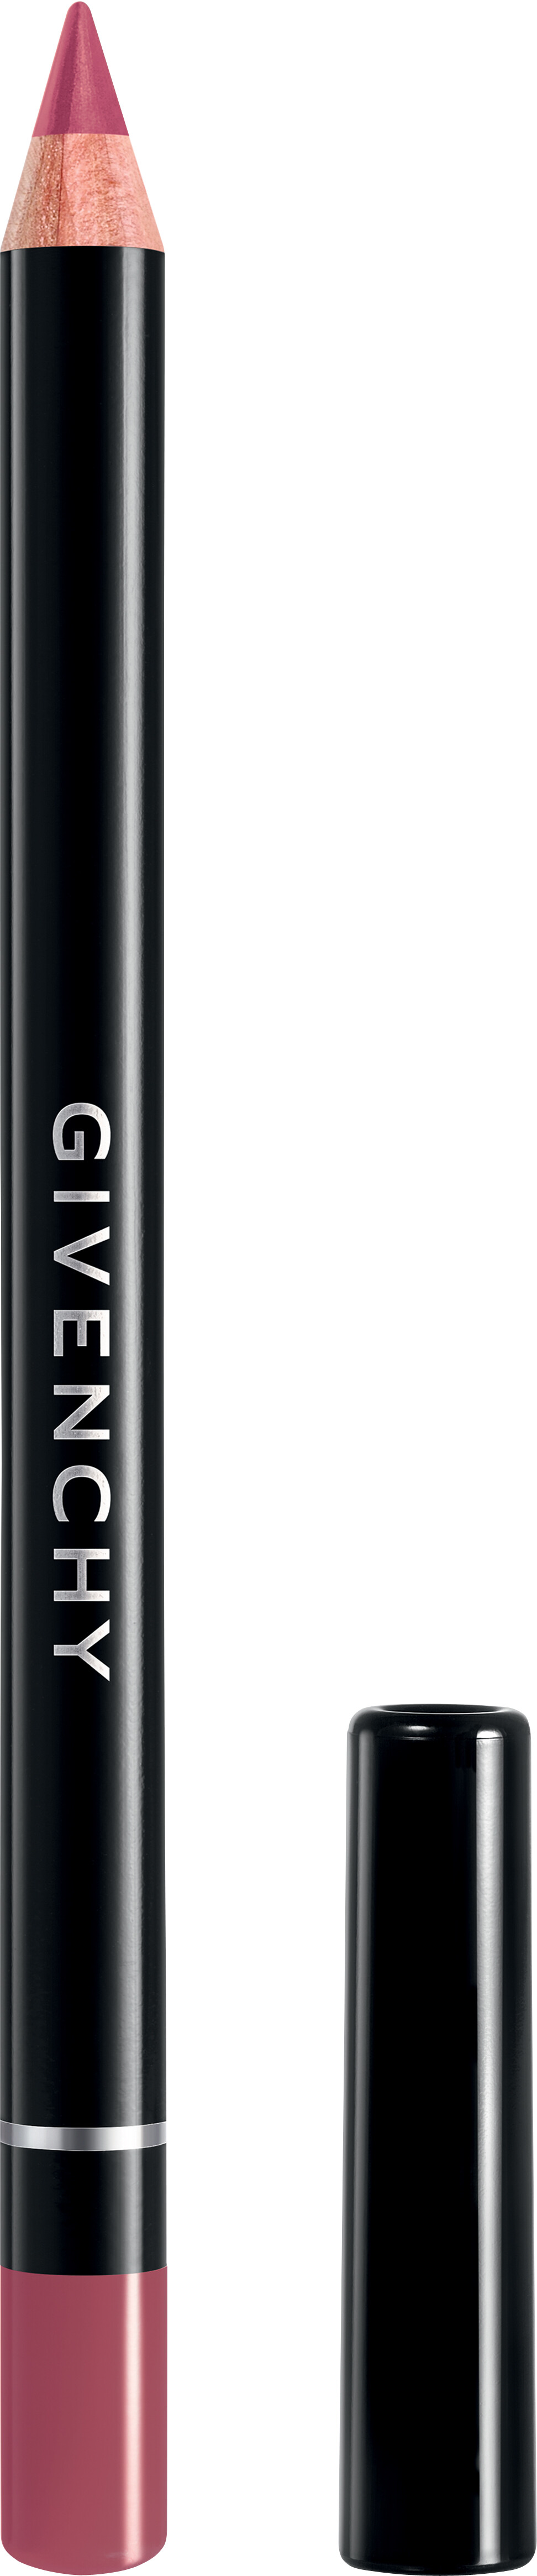 GIVENCHY Lip Liner With Sharpener 1.1g 08 - Parme Silhouette